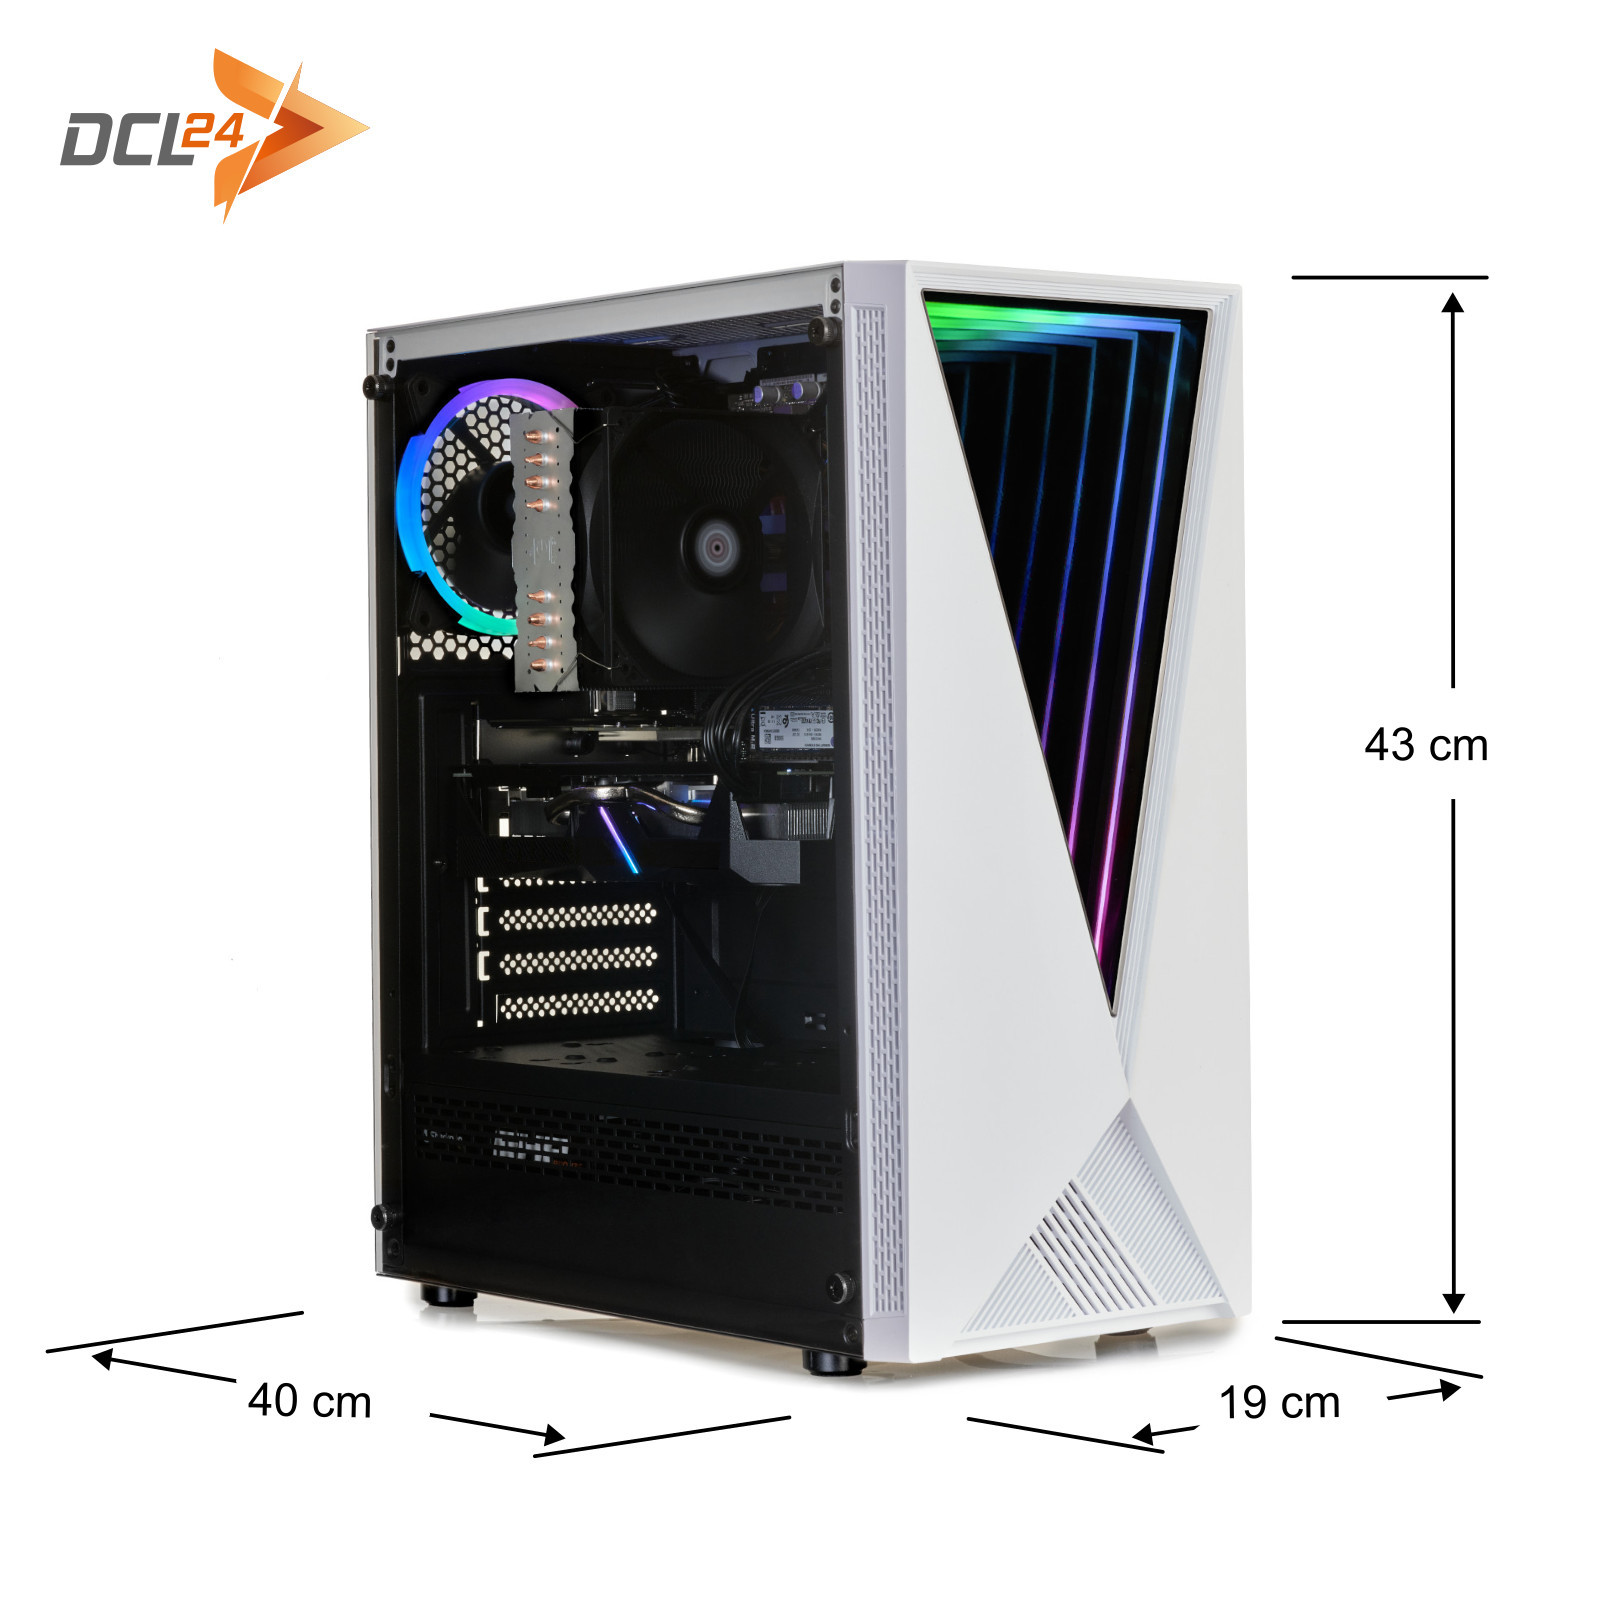 DCL24 Void, Gaming RAM, GB 1000 PC, 16 GB SSD